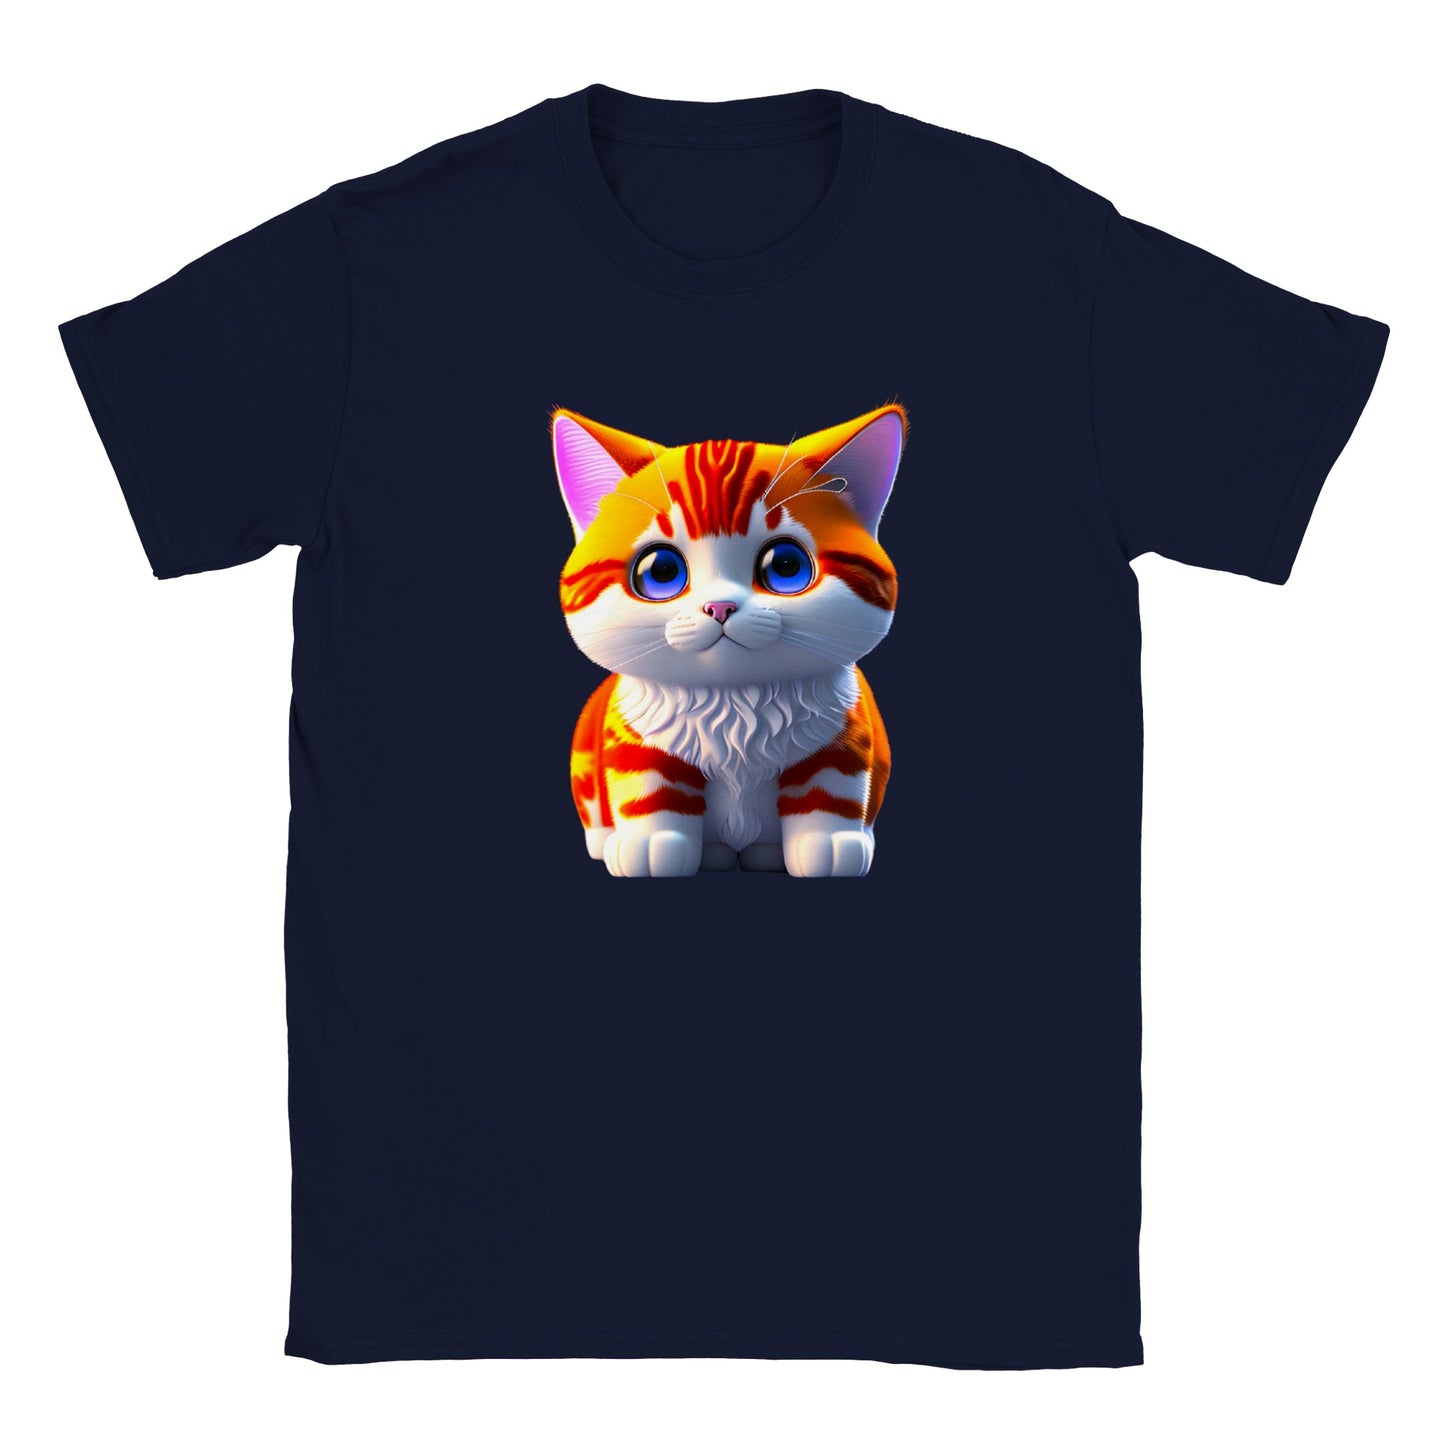 Adorable, Cool, Cute Cats and Kittens Toy - Classic Kids Crewneck T-Shirt 31